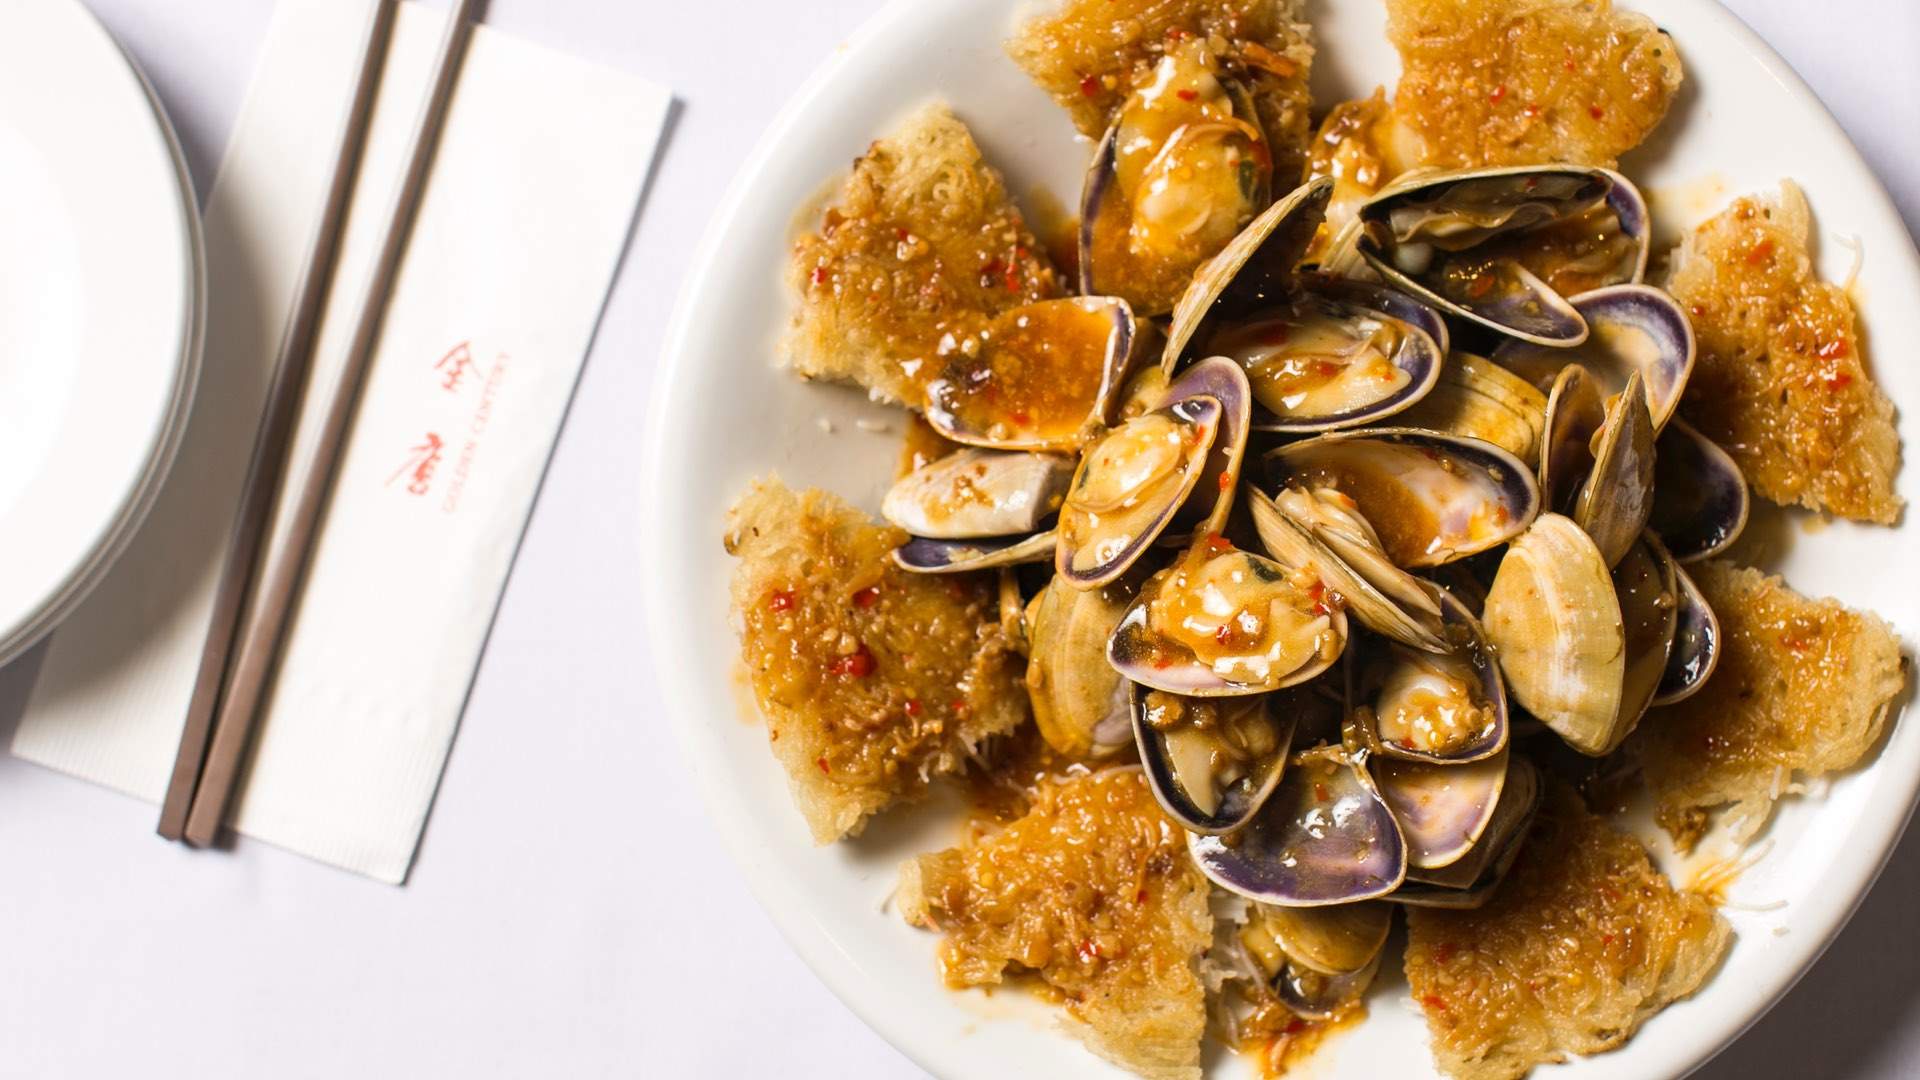 The Golden Century Team's New Modern Restaurant Will be a Homage to Pipis and XO Sauce